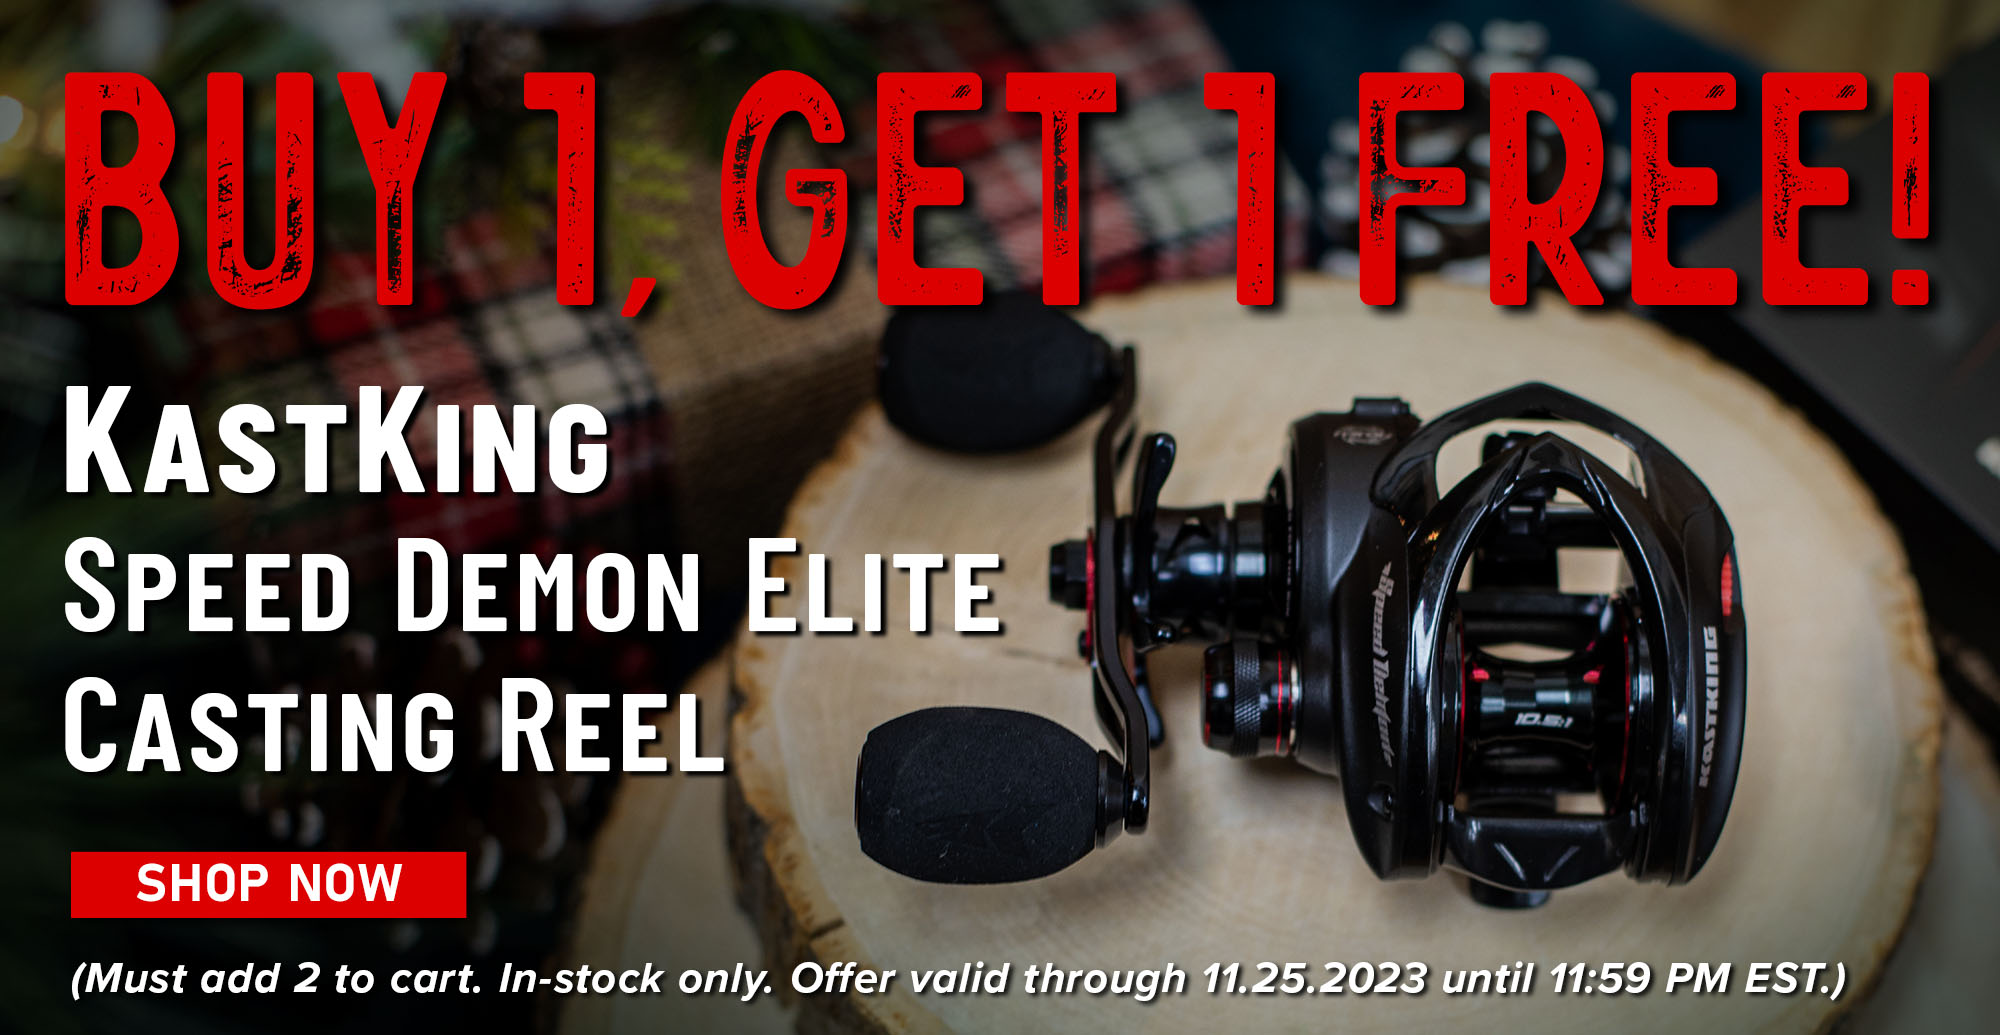 Buy 1, Get 1 Free! KastKing Speed Demon Elite Casting Reel Shop Now (Must add 2 to cart. In-stock only. Offer valid through 11.25.2023 until 11:59 PM EST.)